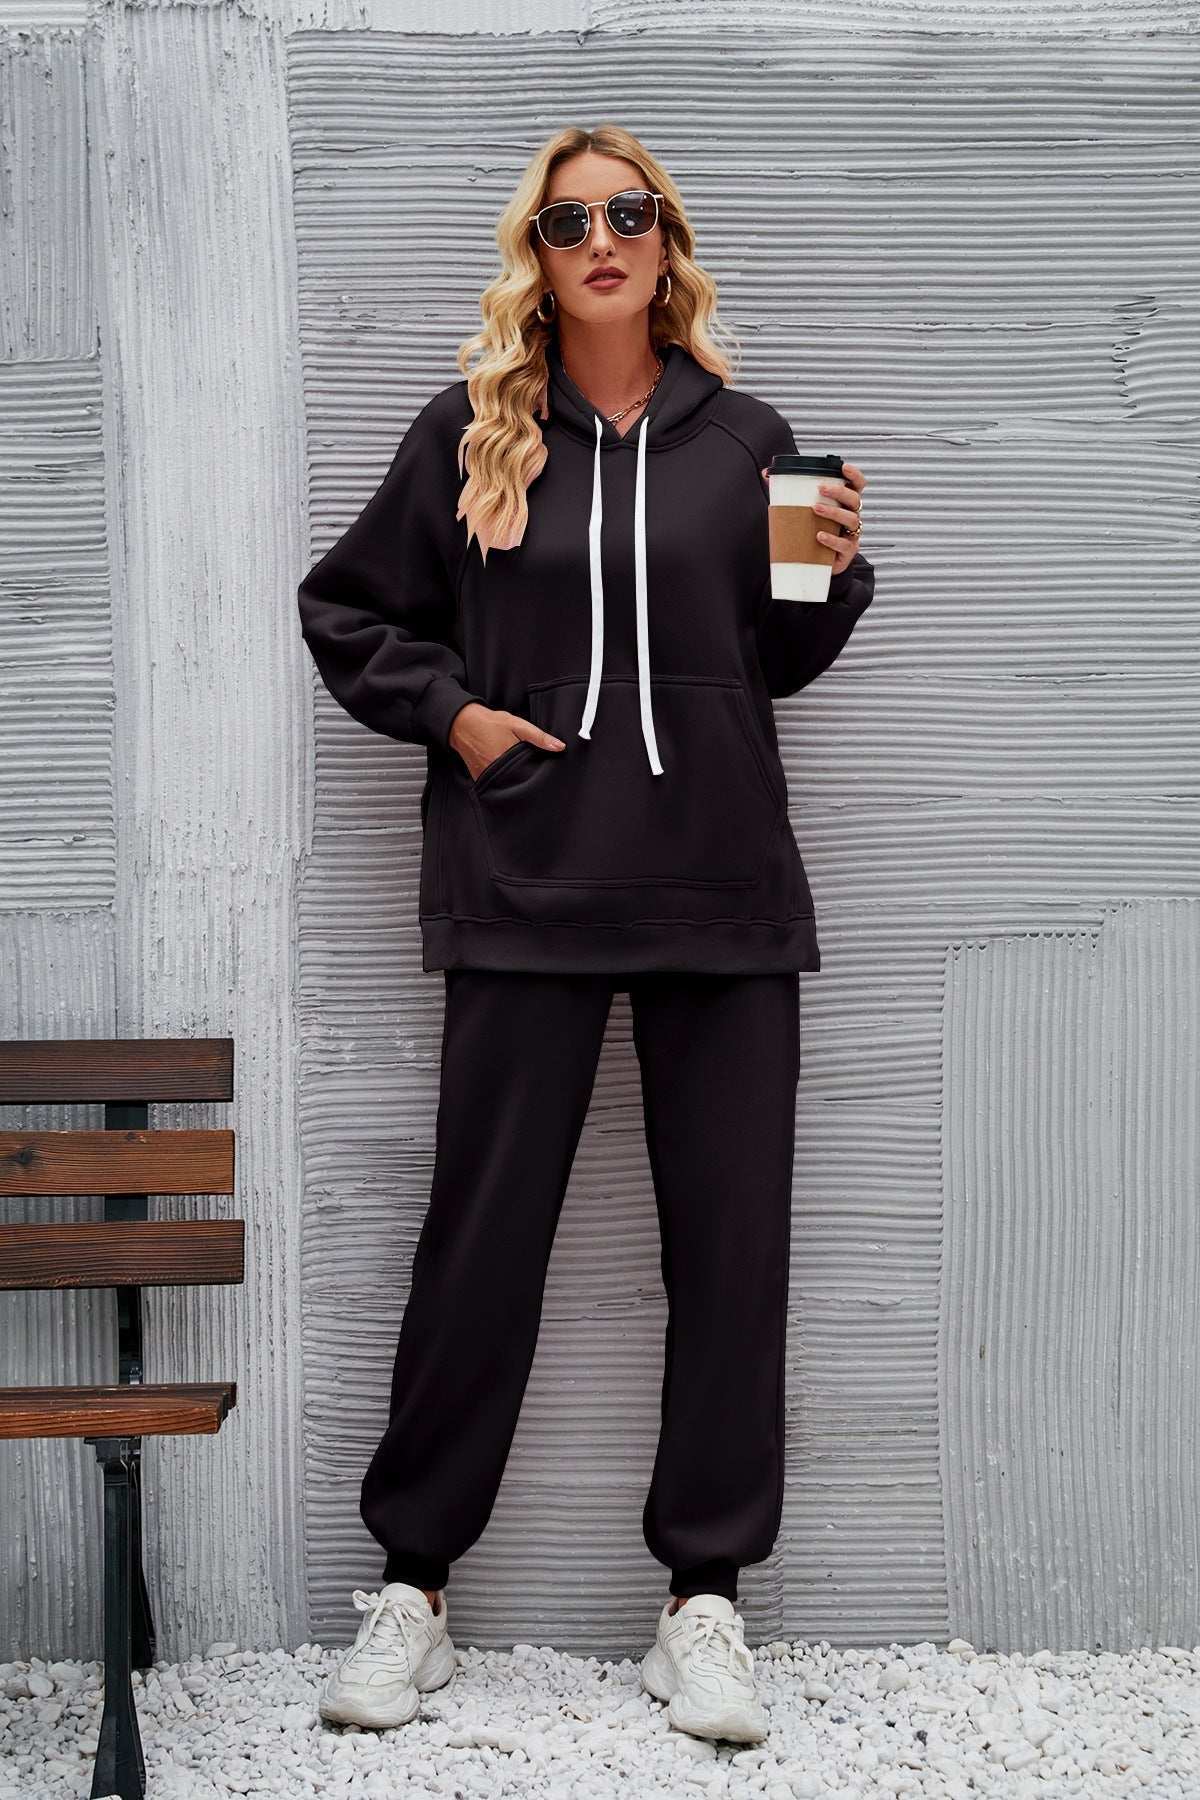 Arrival Casual Loose Fitting Hoodie Top Ankle Tied Trousers Sweater Suit for Women